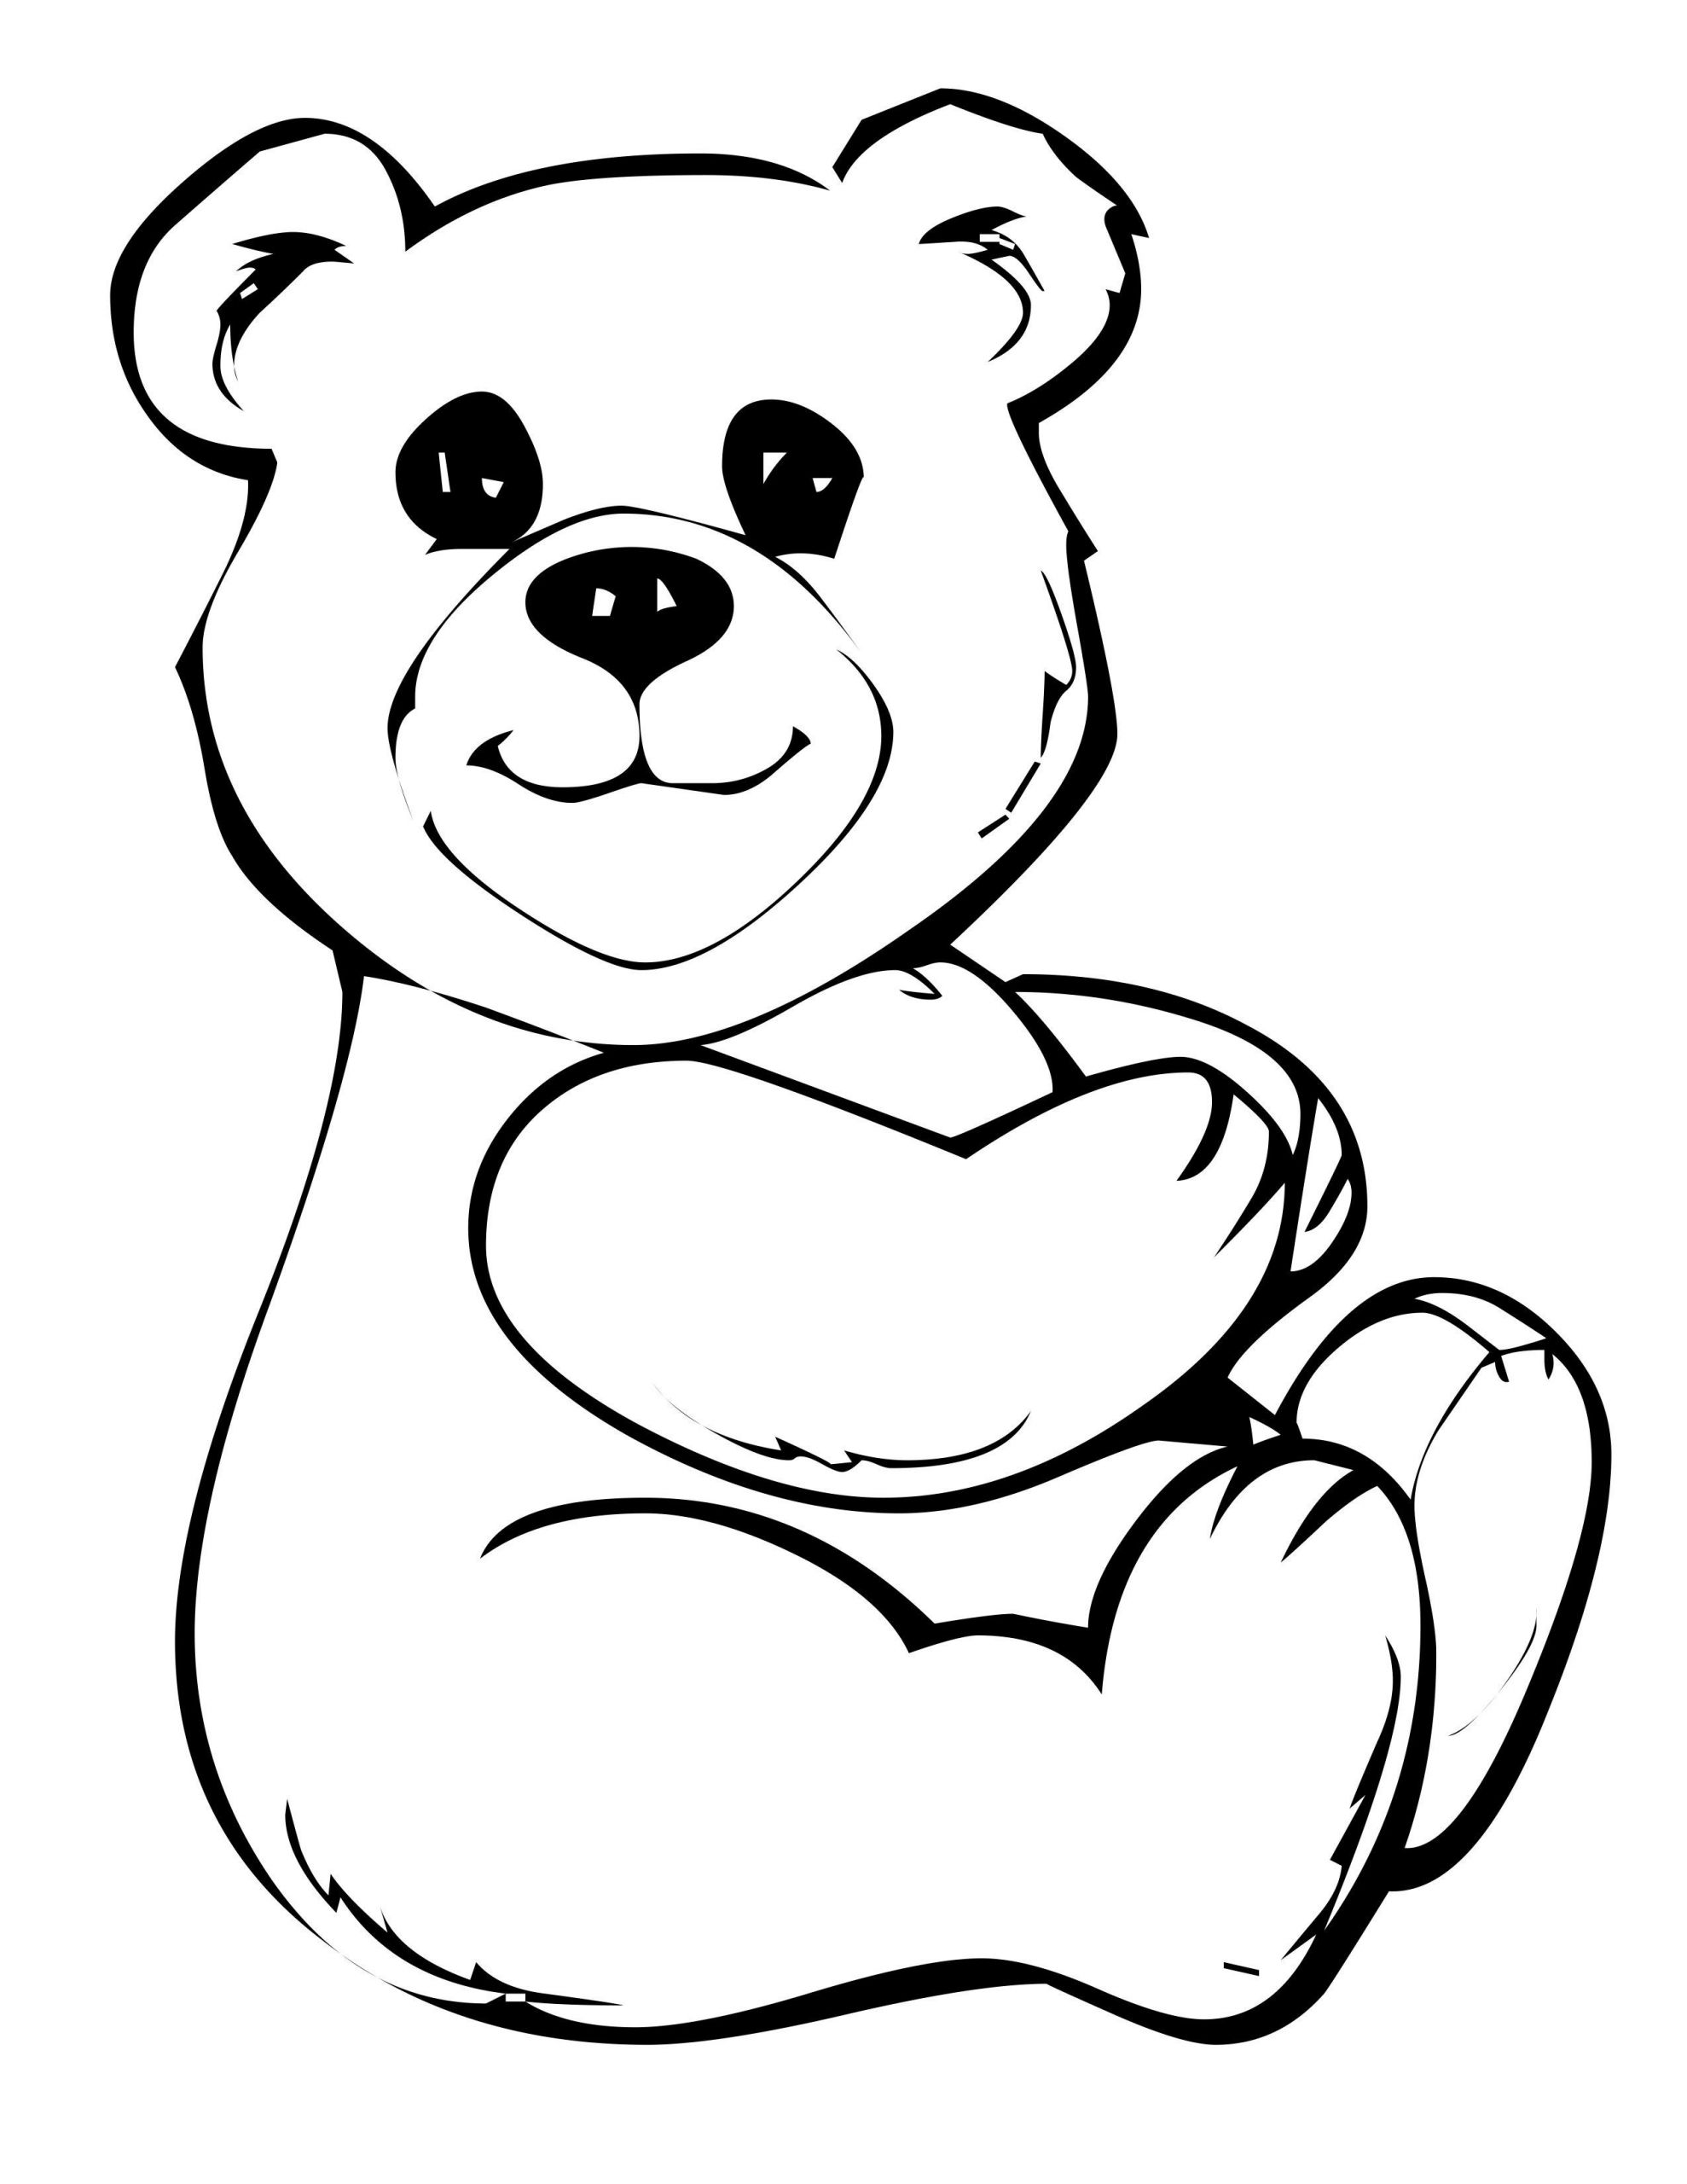 Teddy Bear Coloring Pages Free Printable
 Study Free Printable Teddy Bear Coloring Pages For Kids